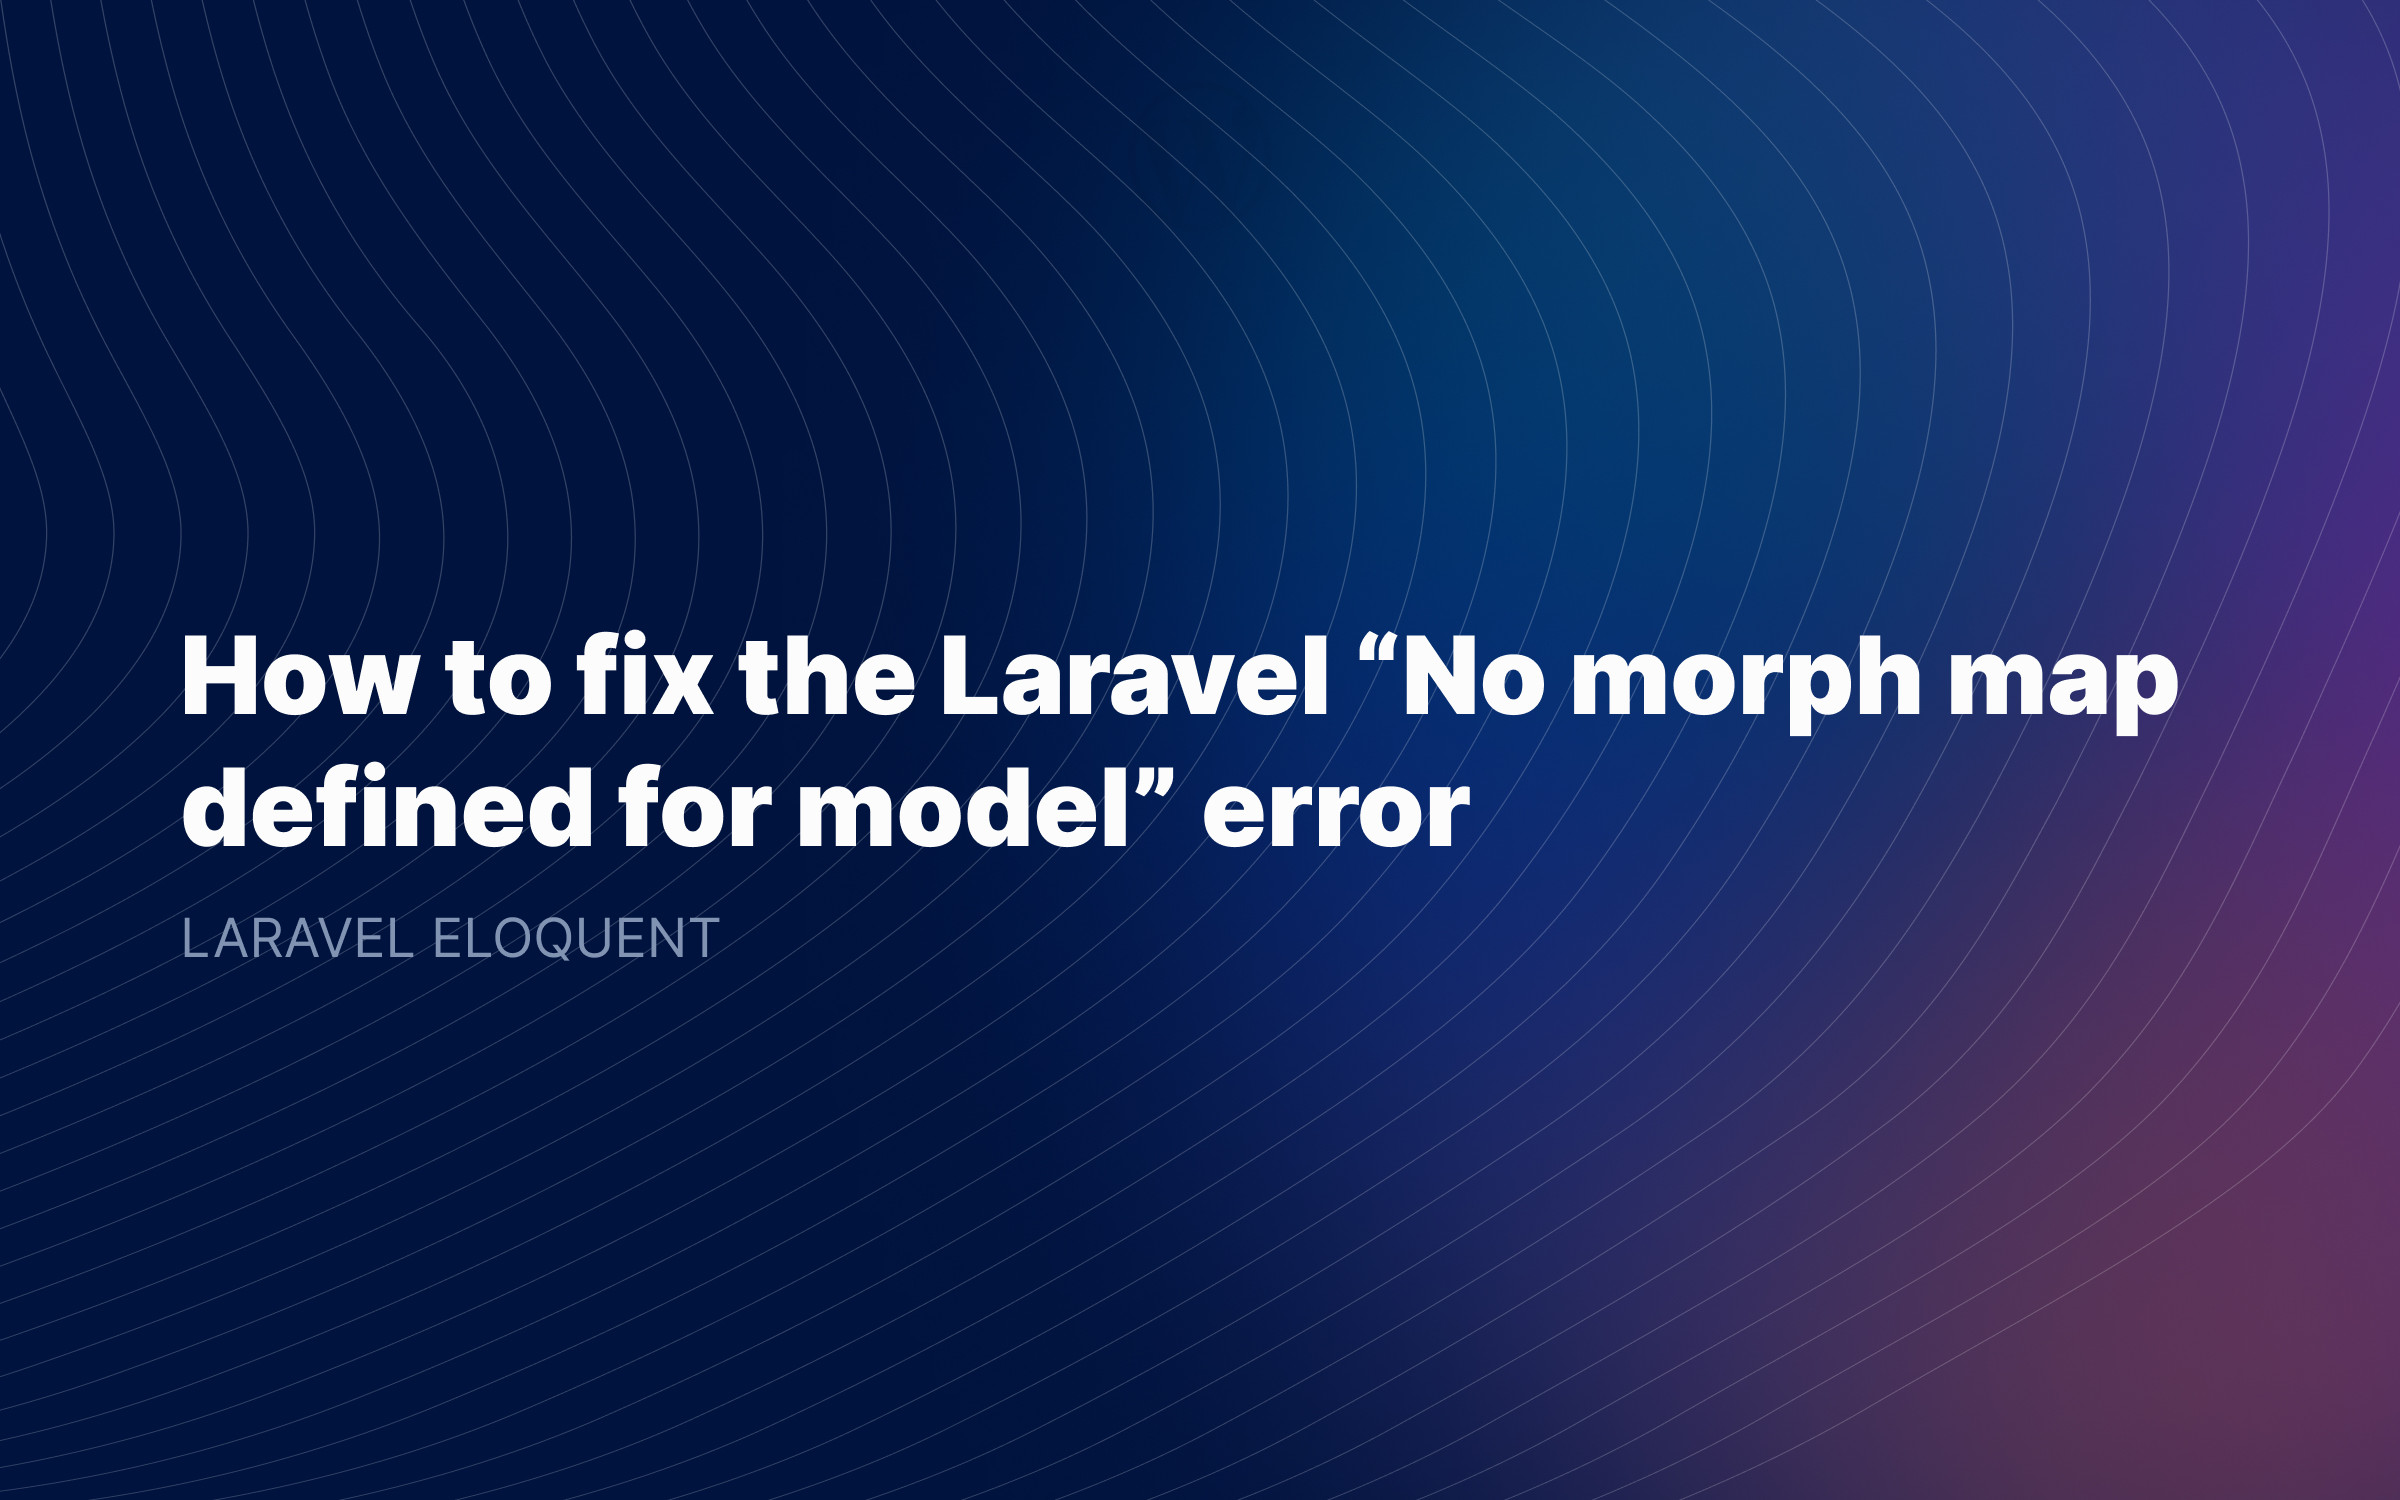 How to fix the Laravel “No morph map defined for model” error